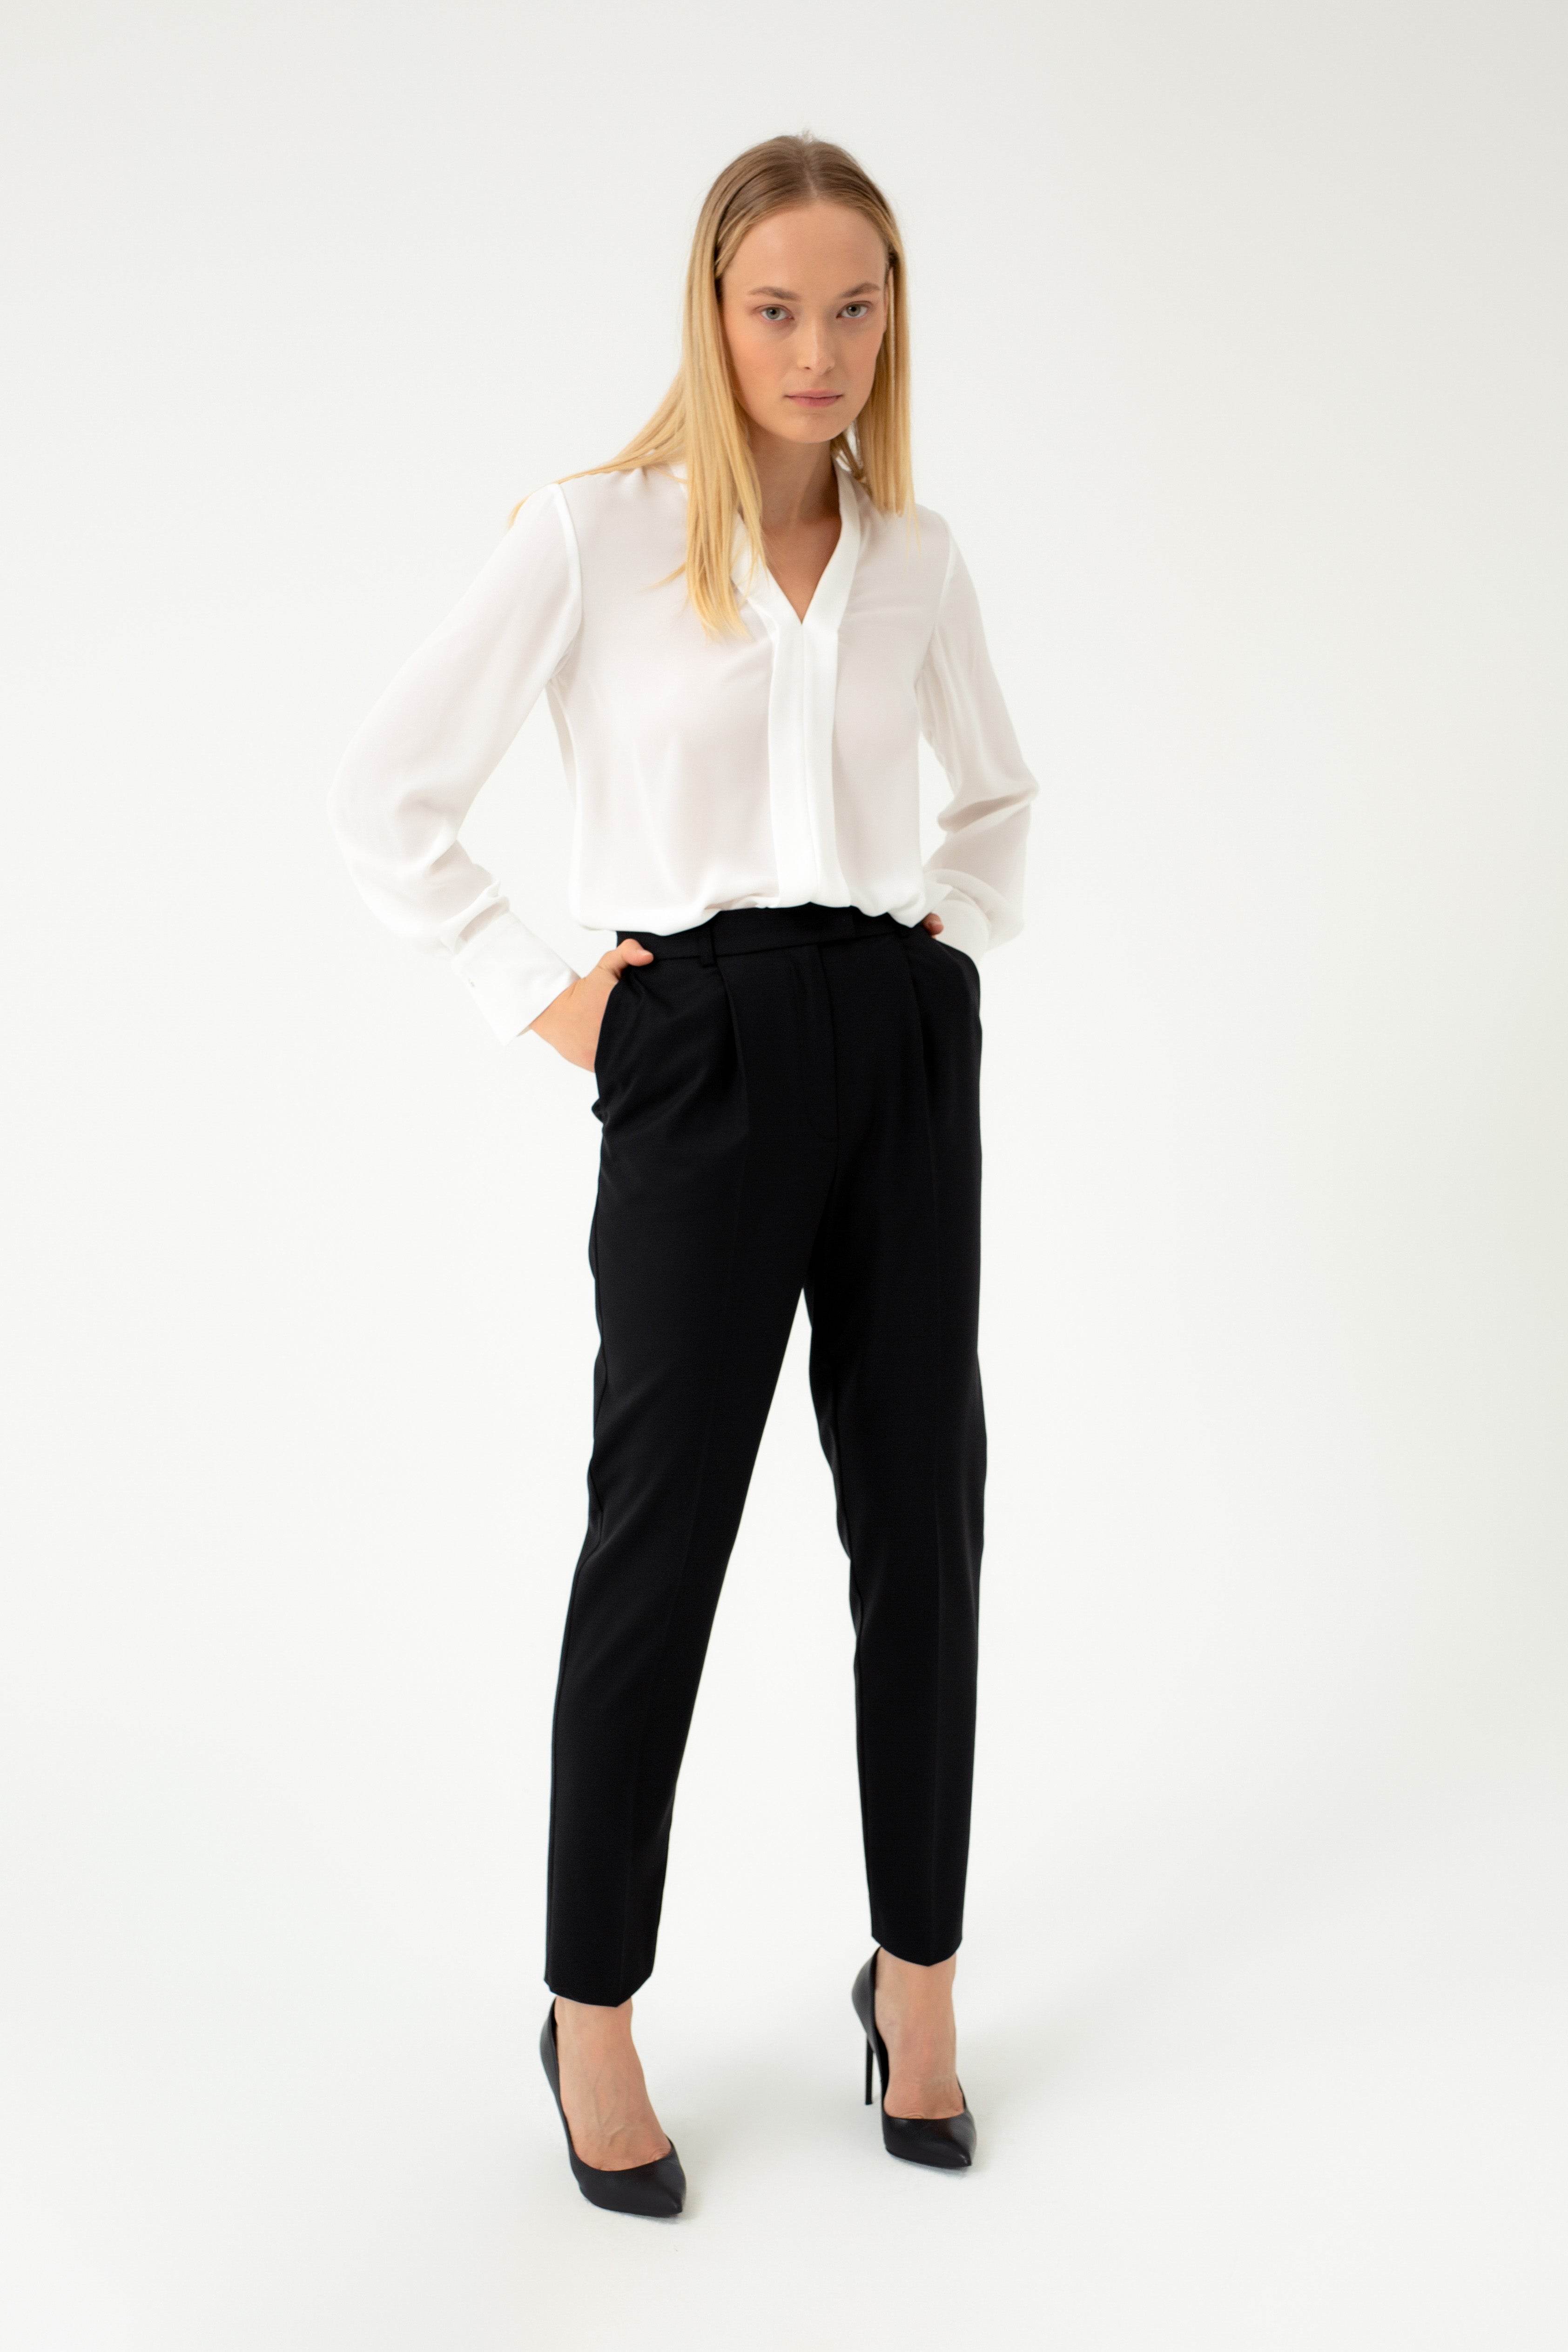 TAPERED SUIT BLACK TROUSERS